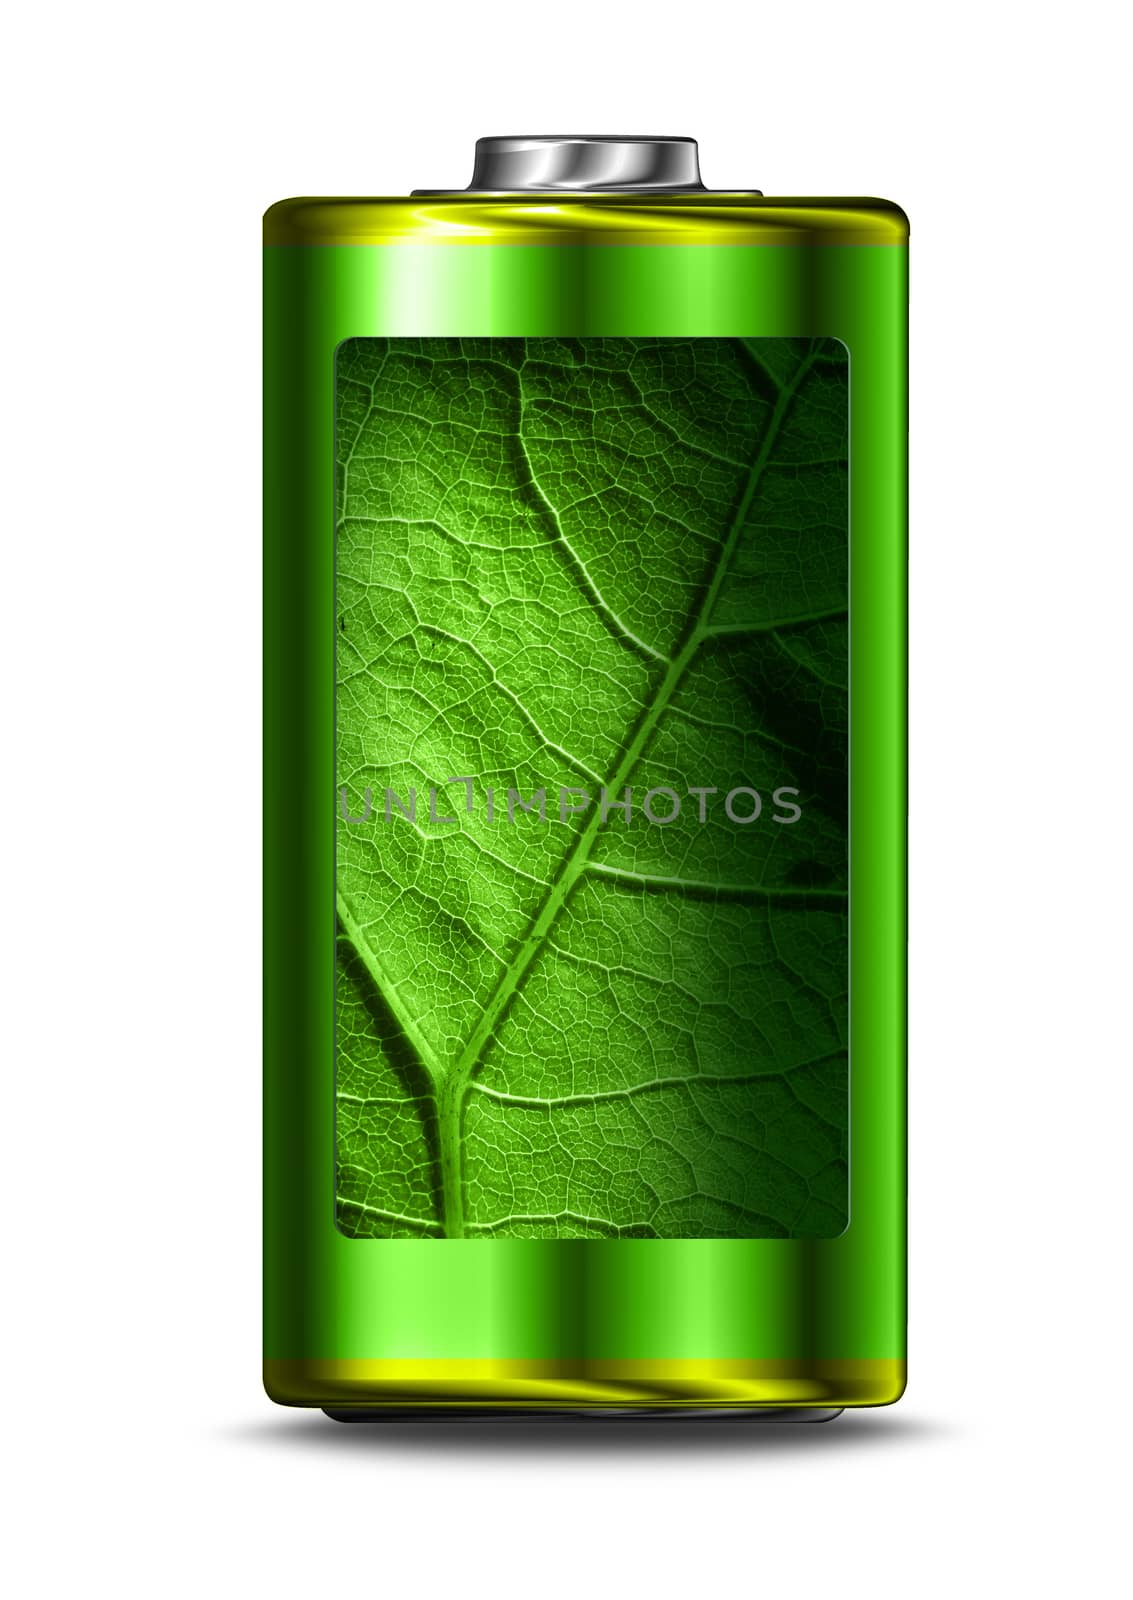 Opened green energy battery cell isolated on white background